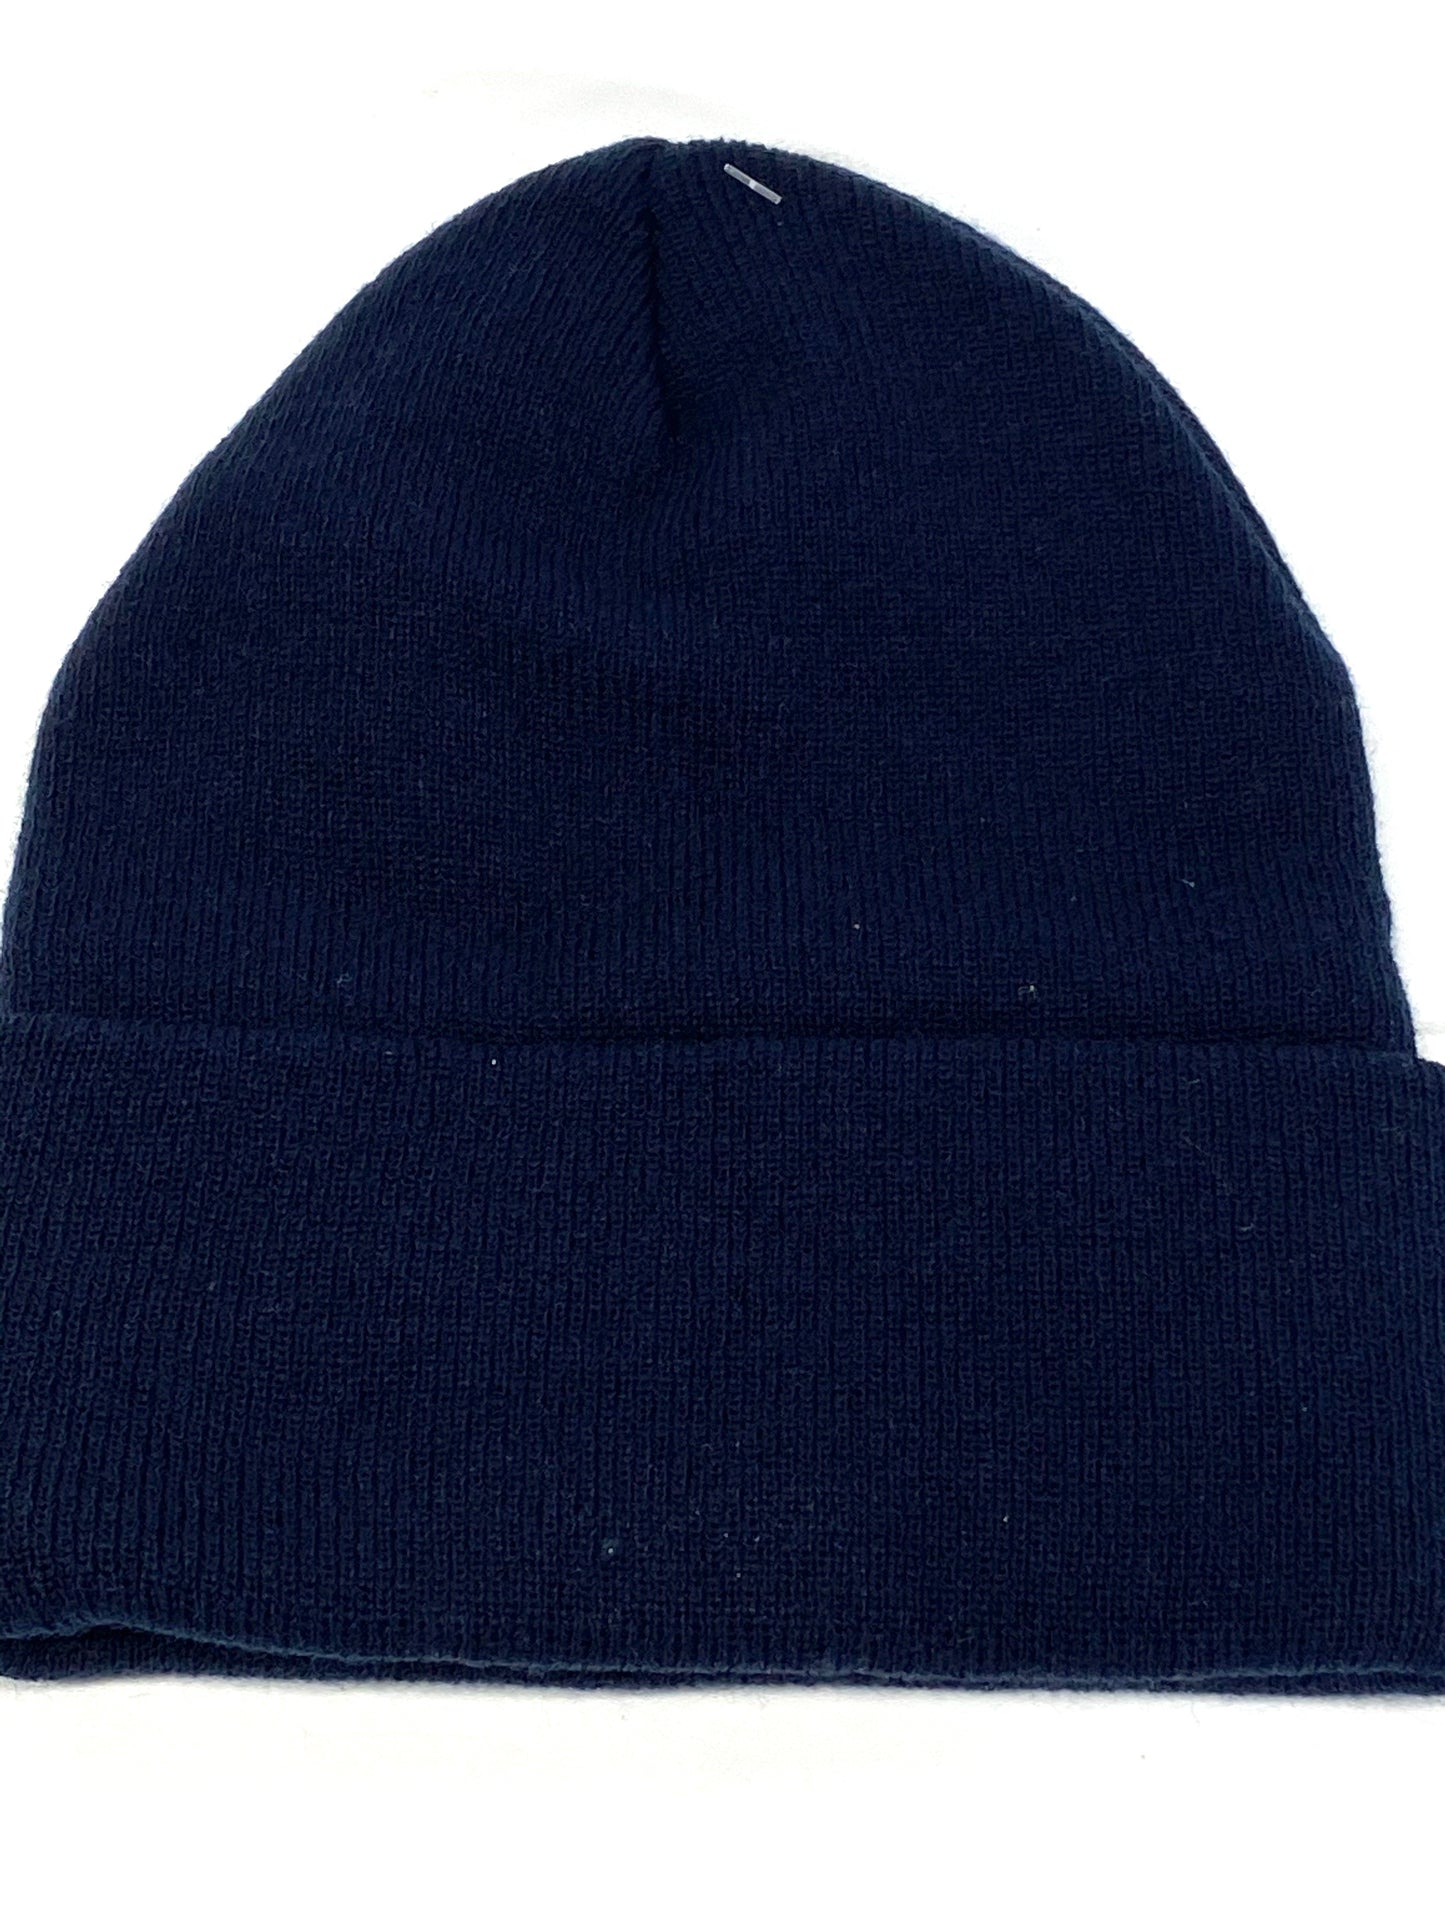 New England Patriots Vintage NFL Cuffed Blue Knit Logo Hat by G Knit Cap Company